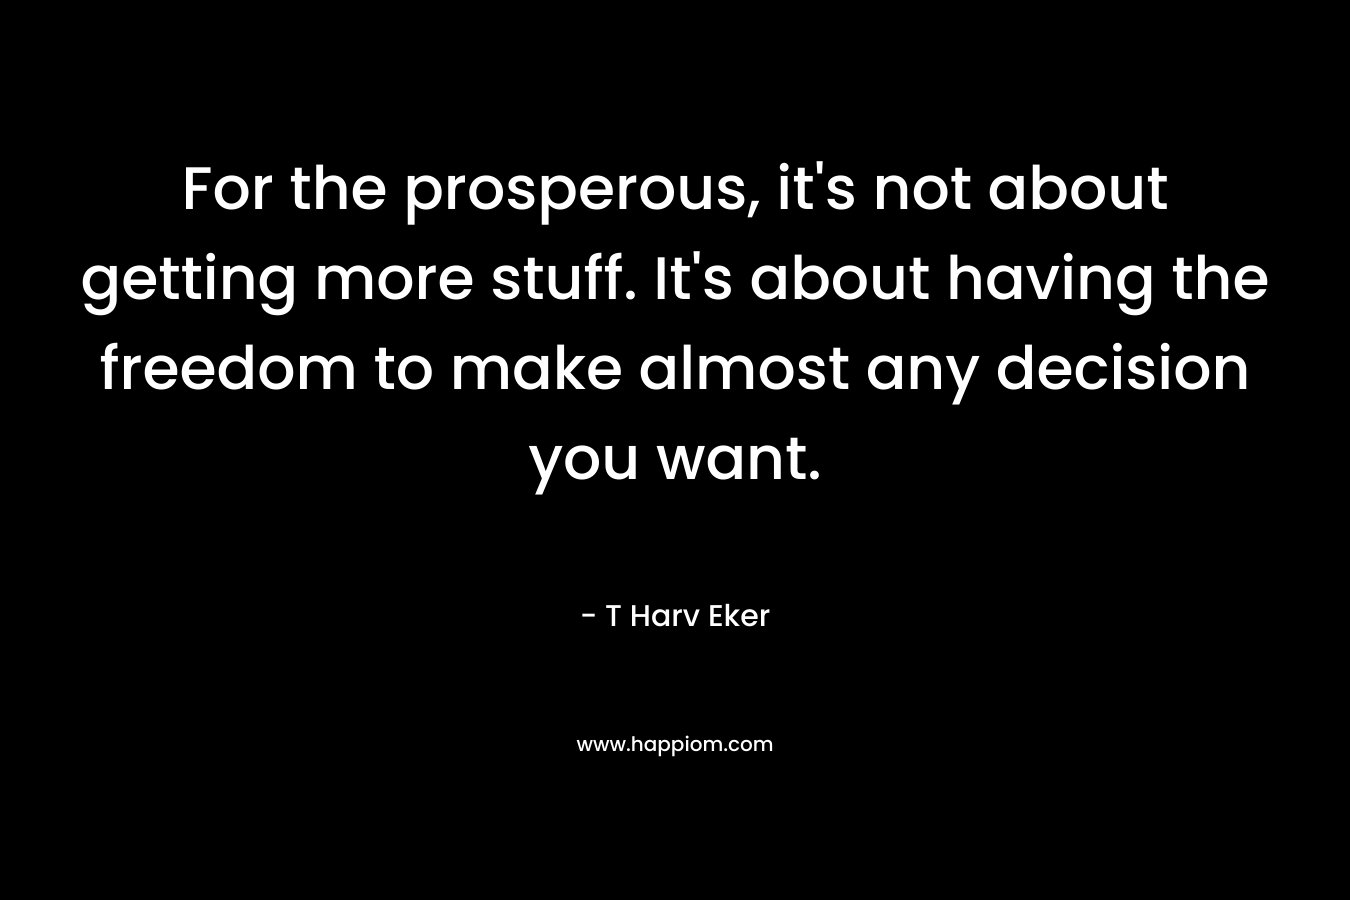 For the prosperous, it's not about getting more stuff. It's about having the freedom to make almost any decision you want.